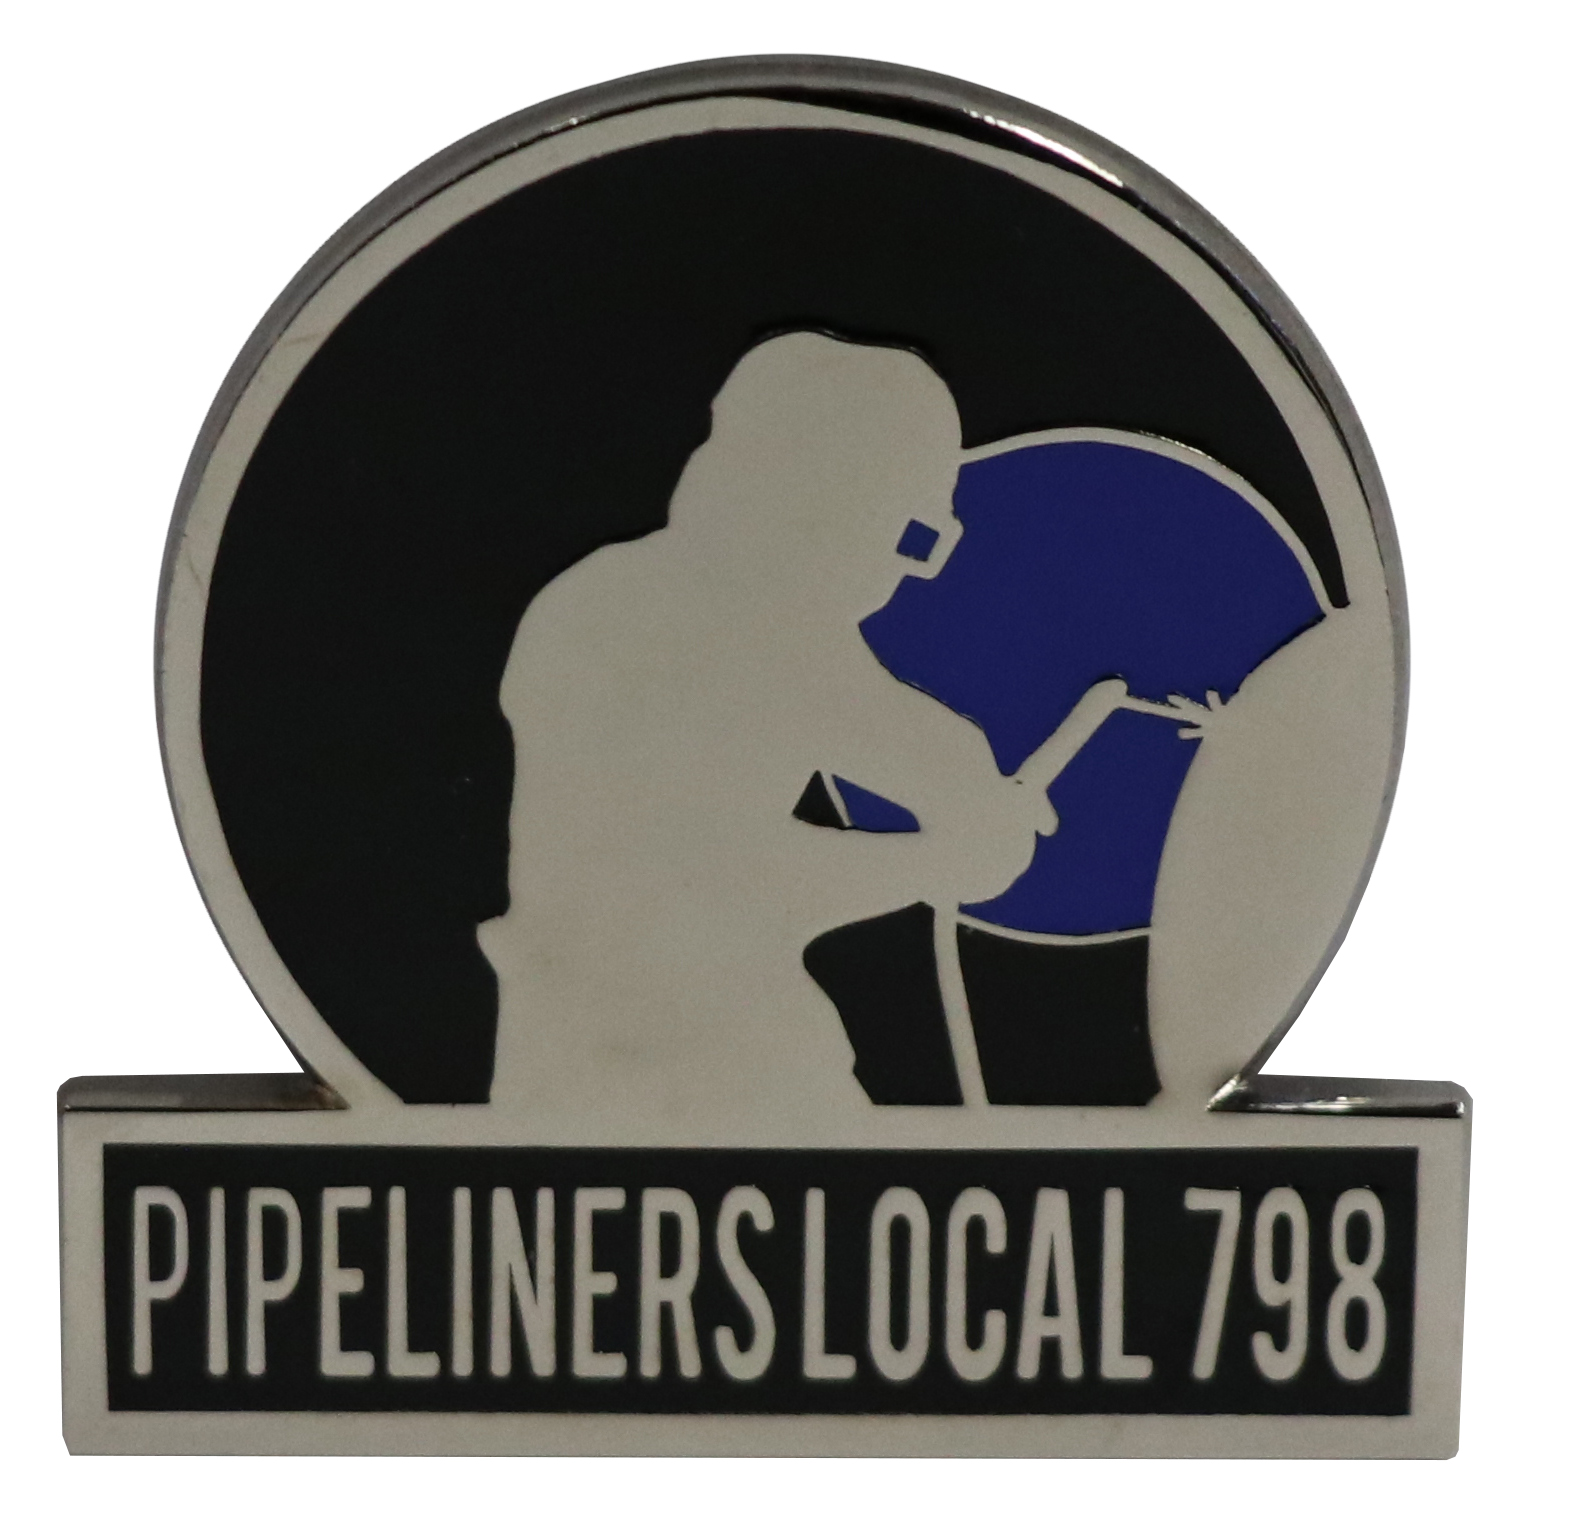 Pipe liners local 798 pre jobs cwi environment science jobs